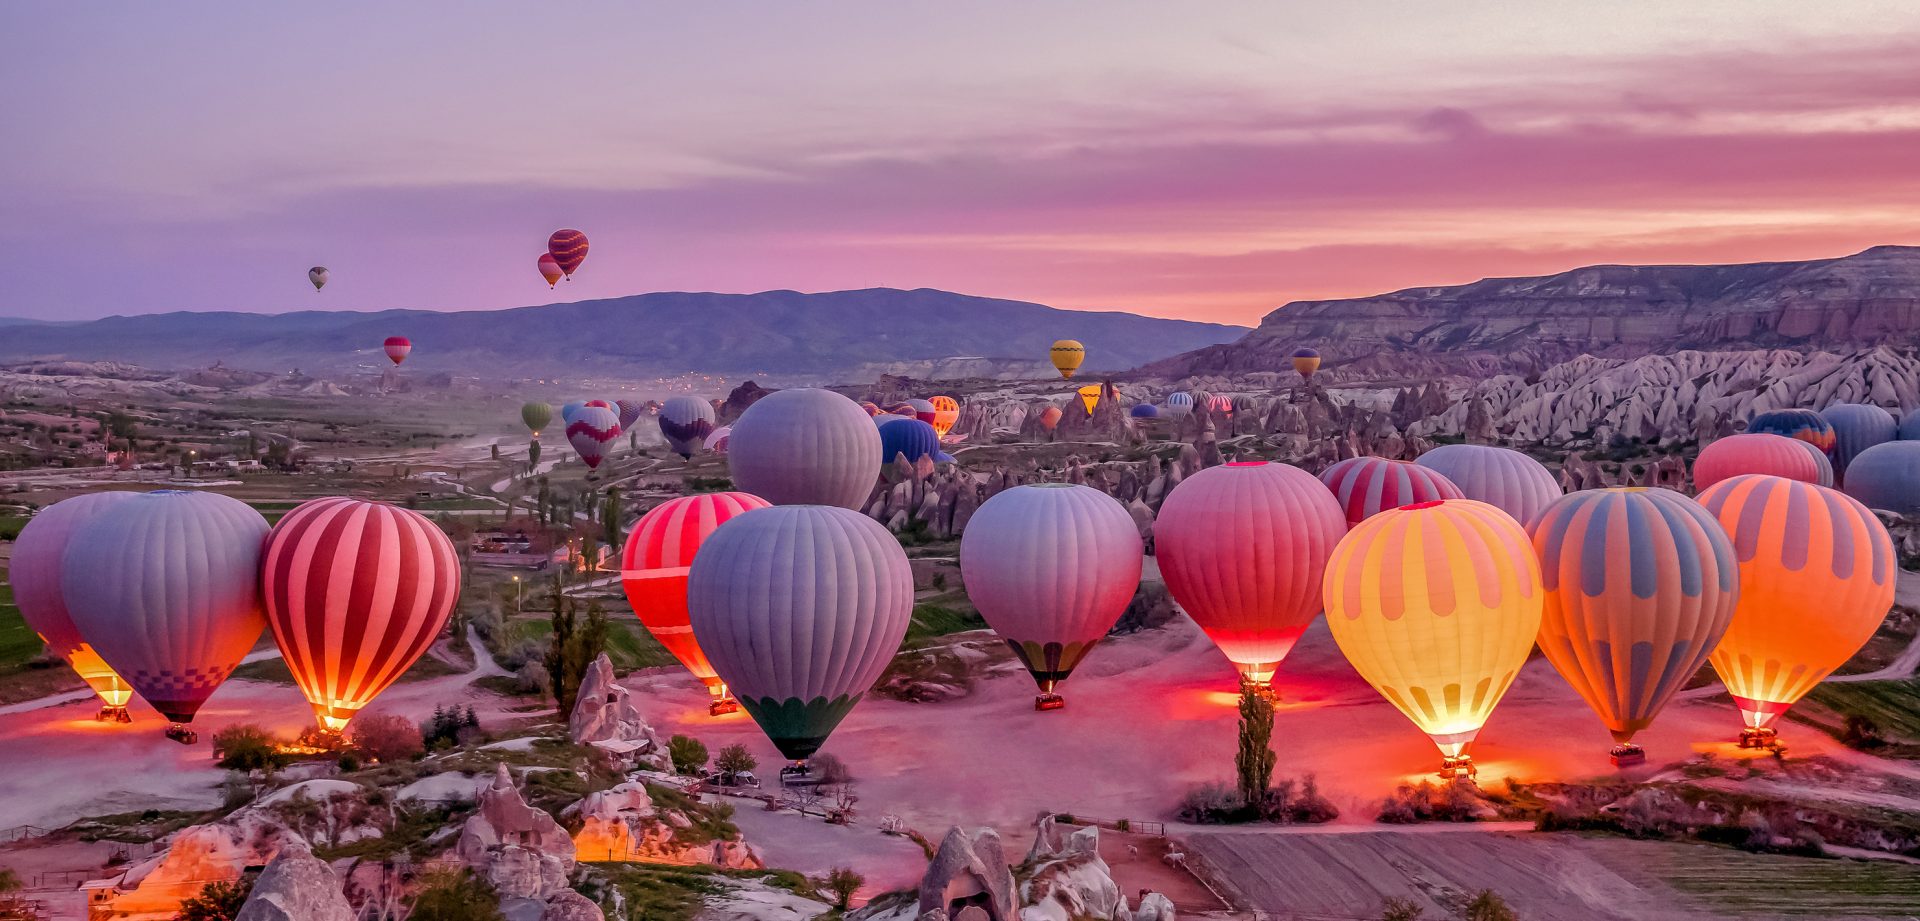 Hot air balloons glow in the early morning light of Cappadocia, Turkey.